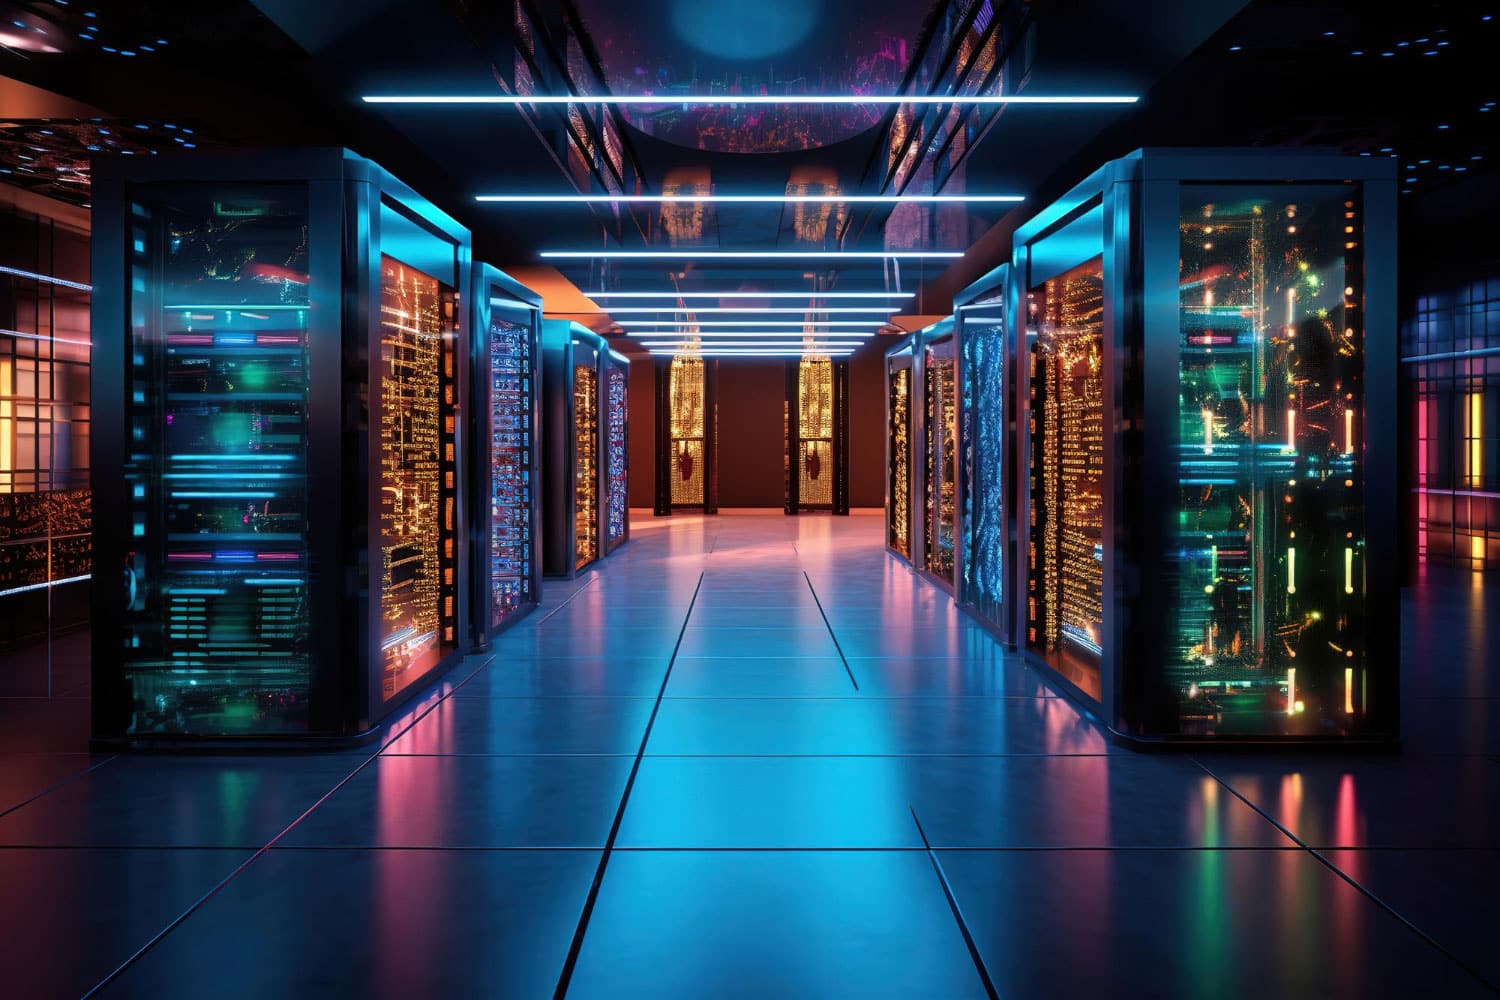 Novel tools help cut down on energy use in data centers